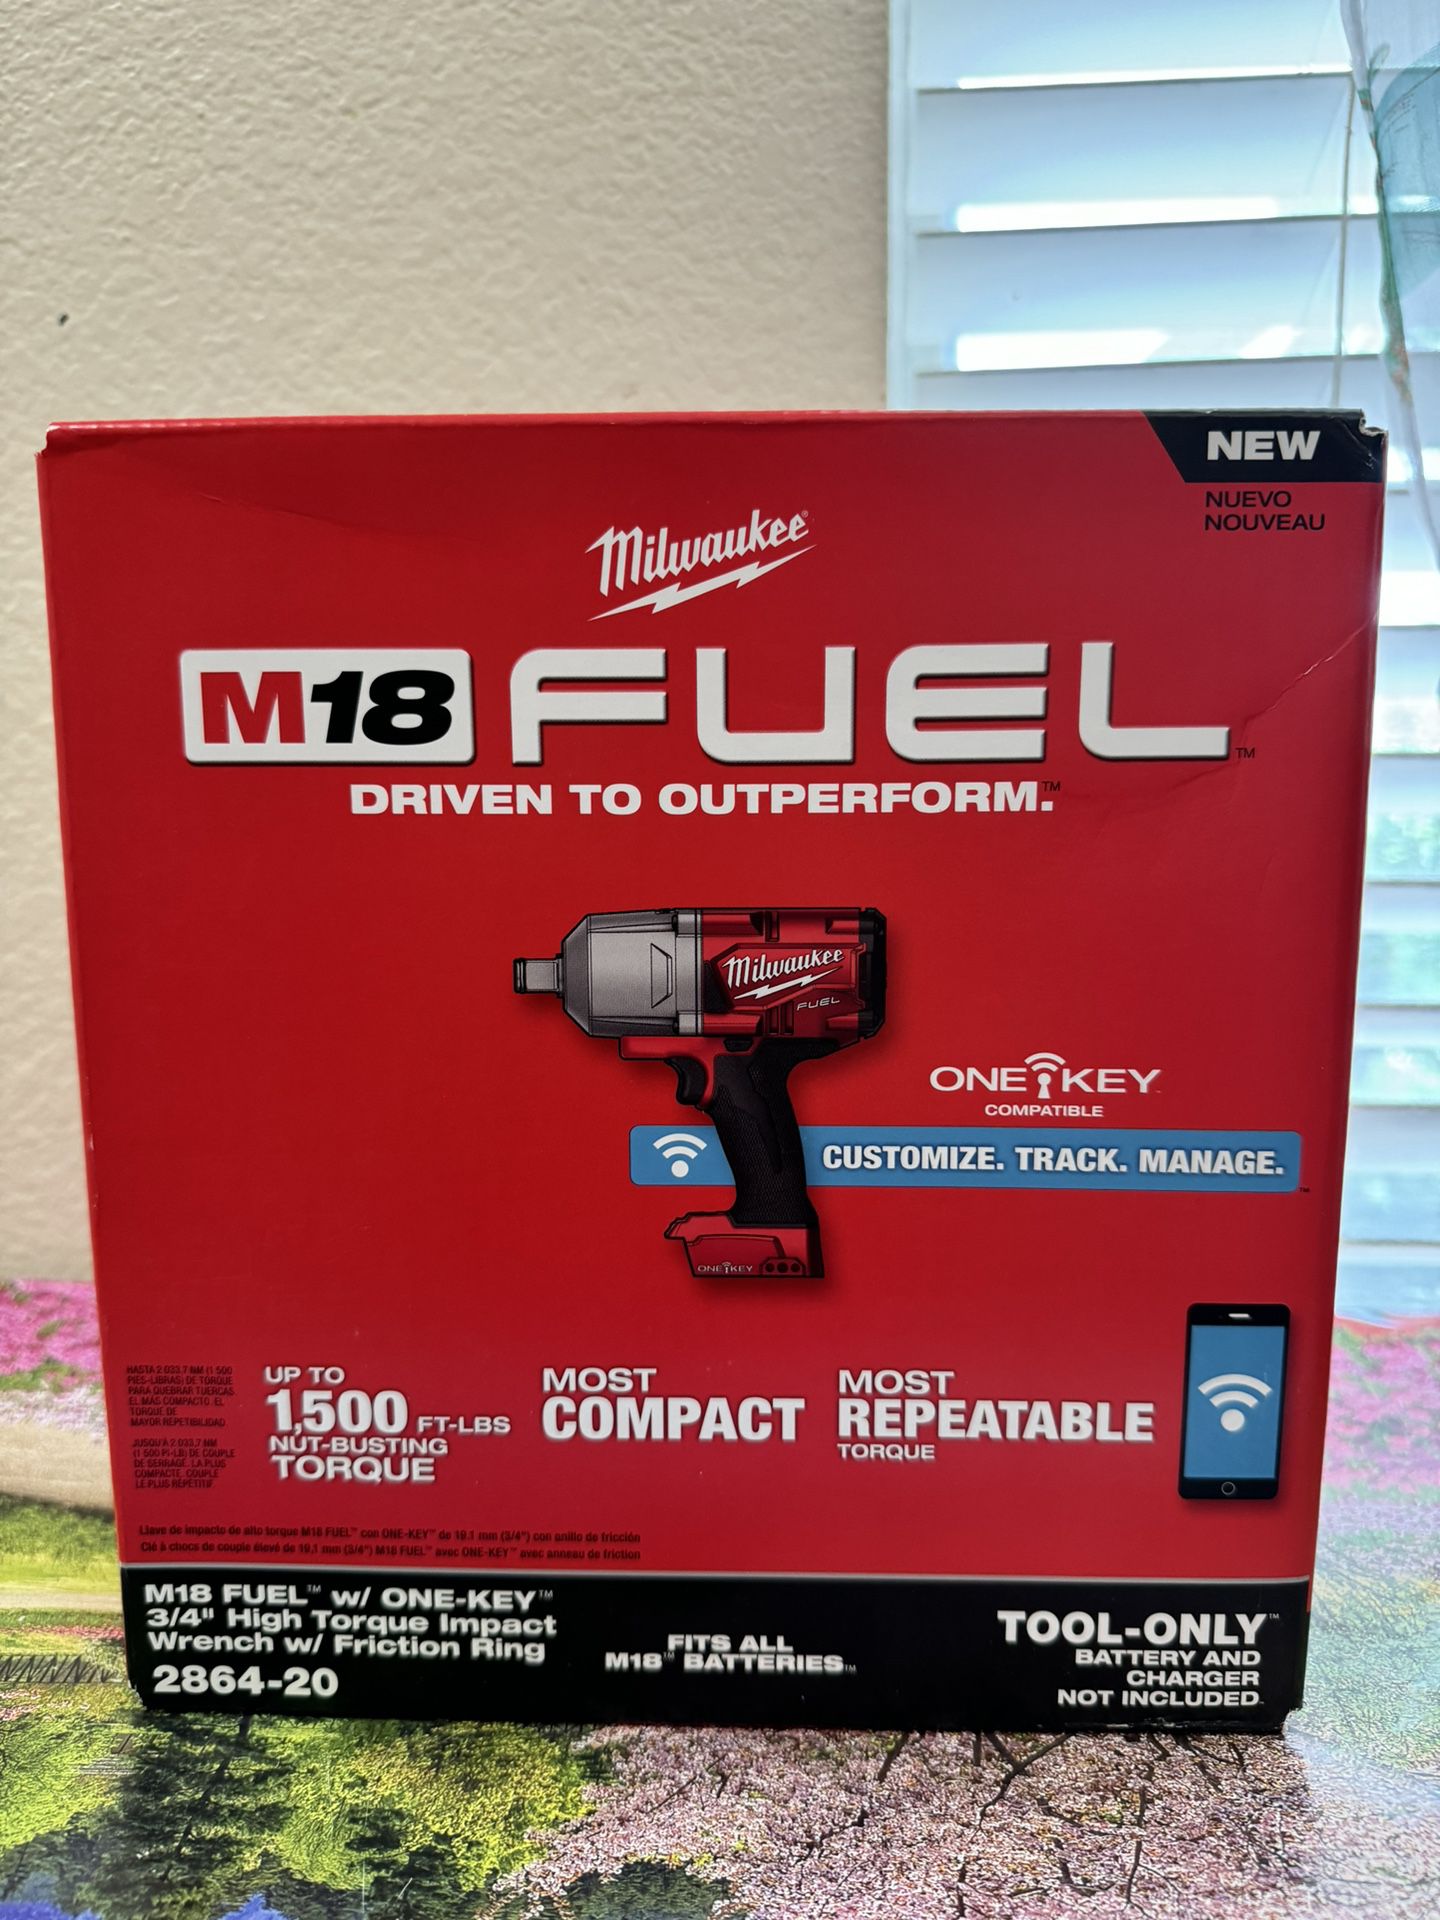 Milwaukee M18 FUEL ONE-KEY 18V Lithium-Ion Brushless Cordless 3/4 in. Impact Wrench with Friction Ri